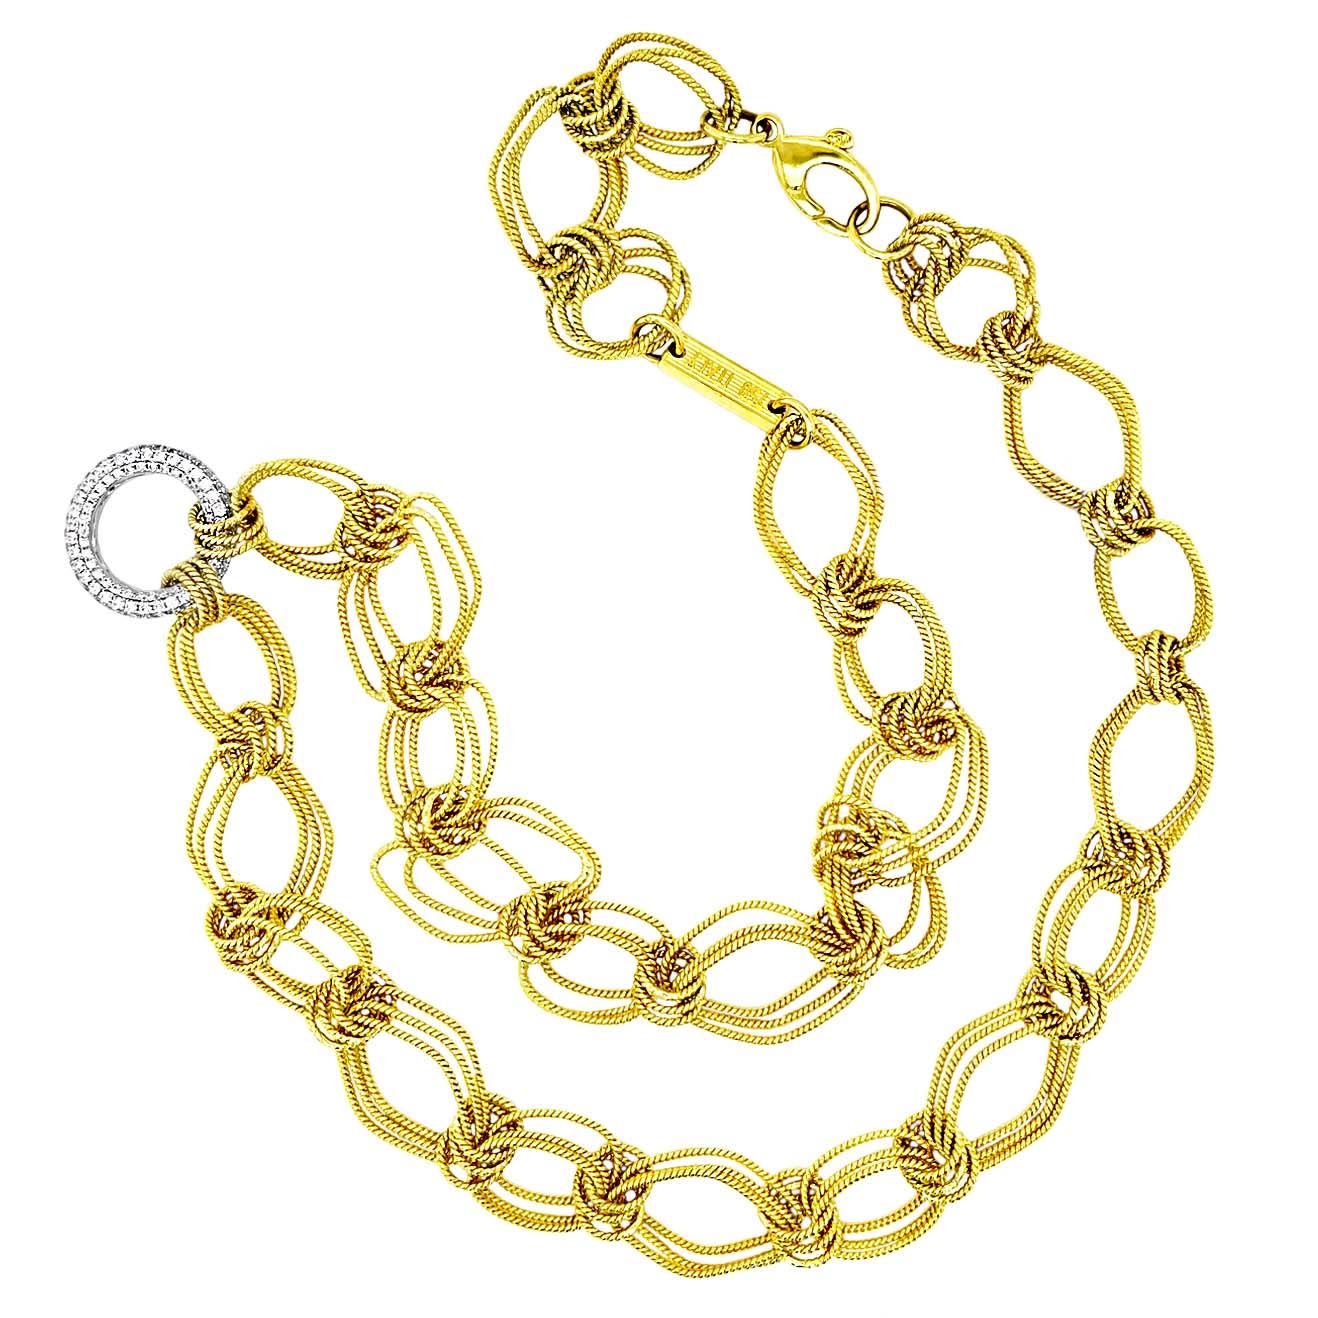 Artisan Vitolo 18 Karat Handmade Link Necklace with Double Sided Diamond Set Circle For Sale